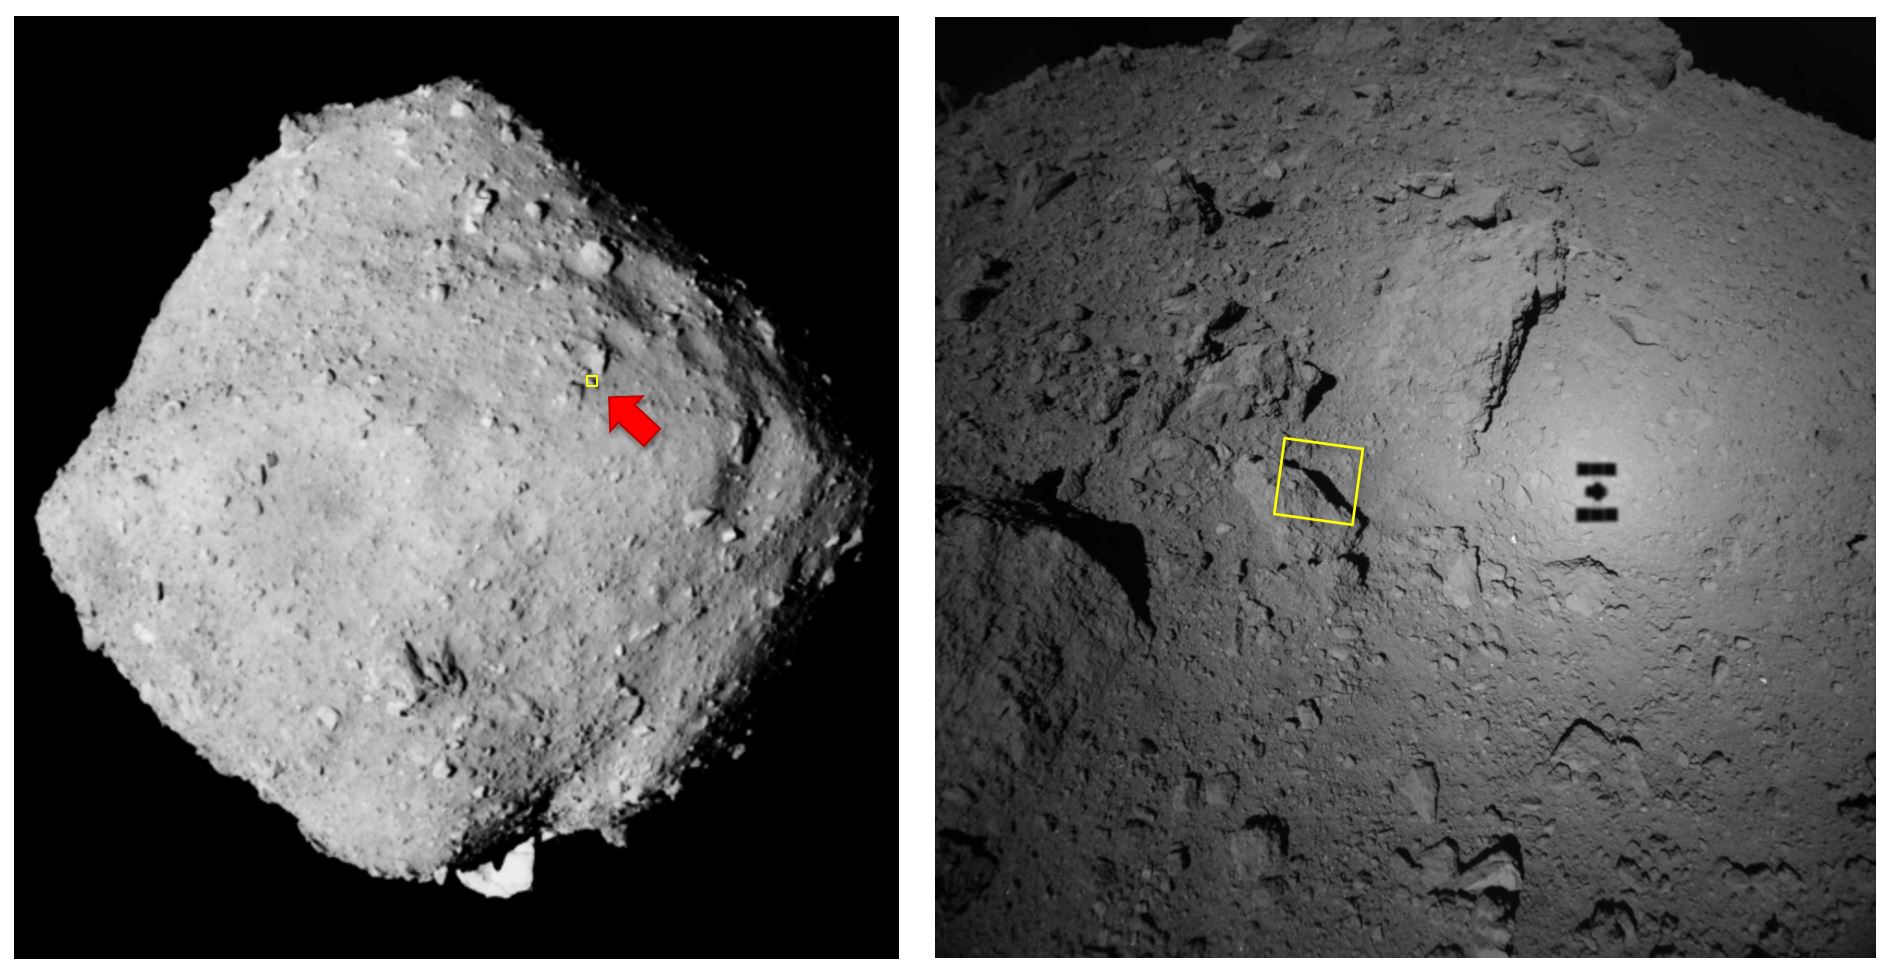 Asteroid Ryugu Might Actually Be a Dead Comet